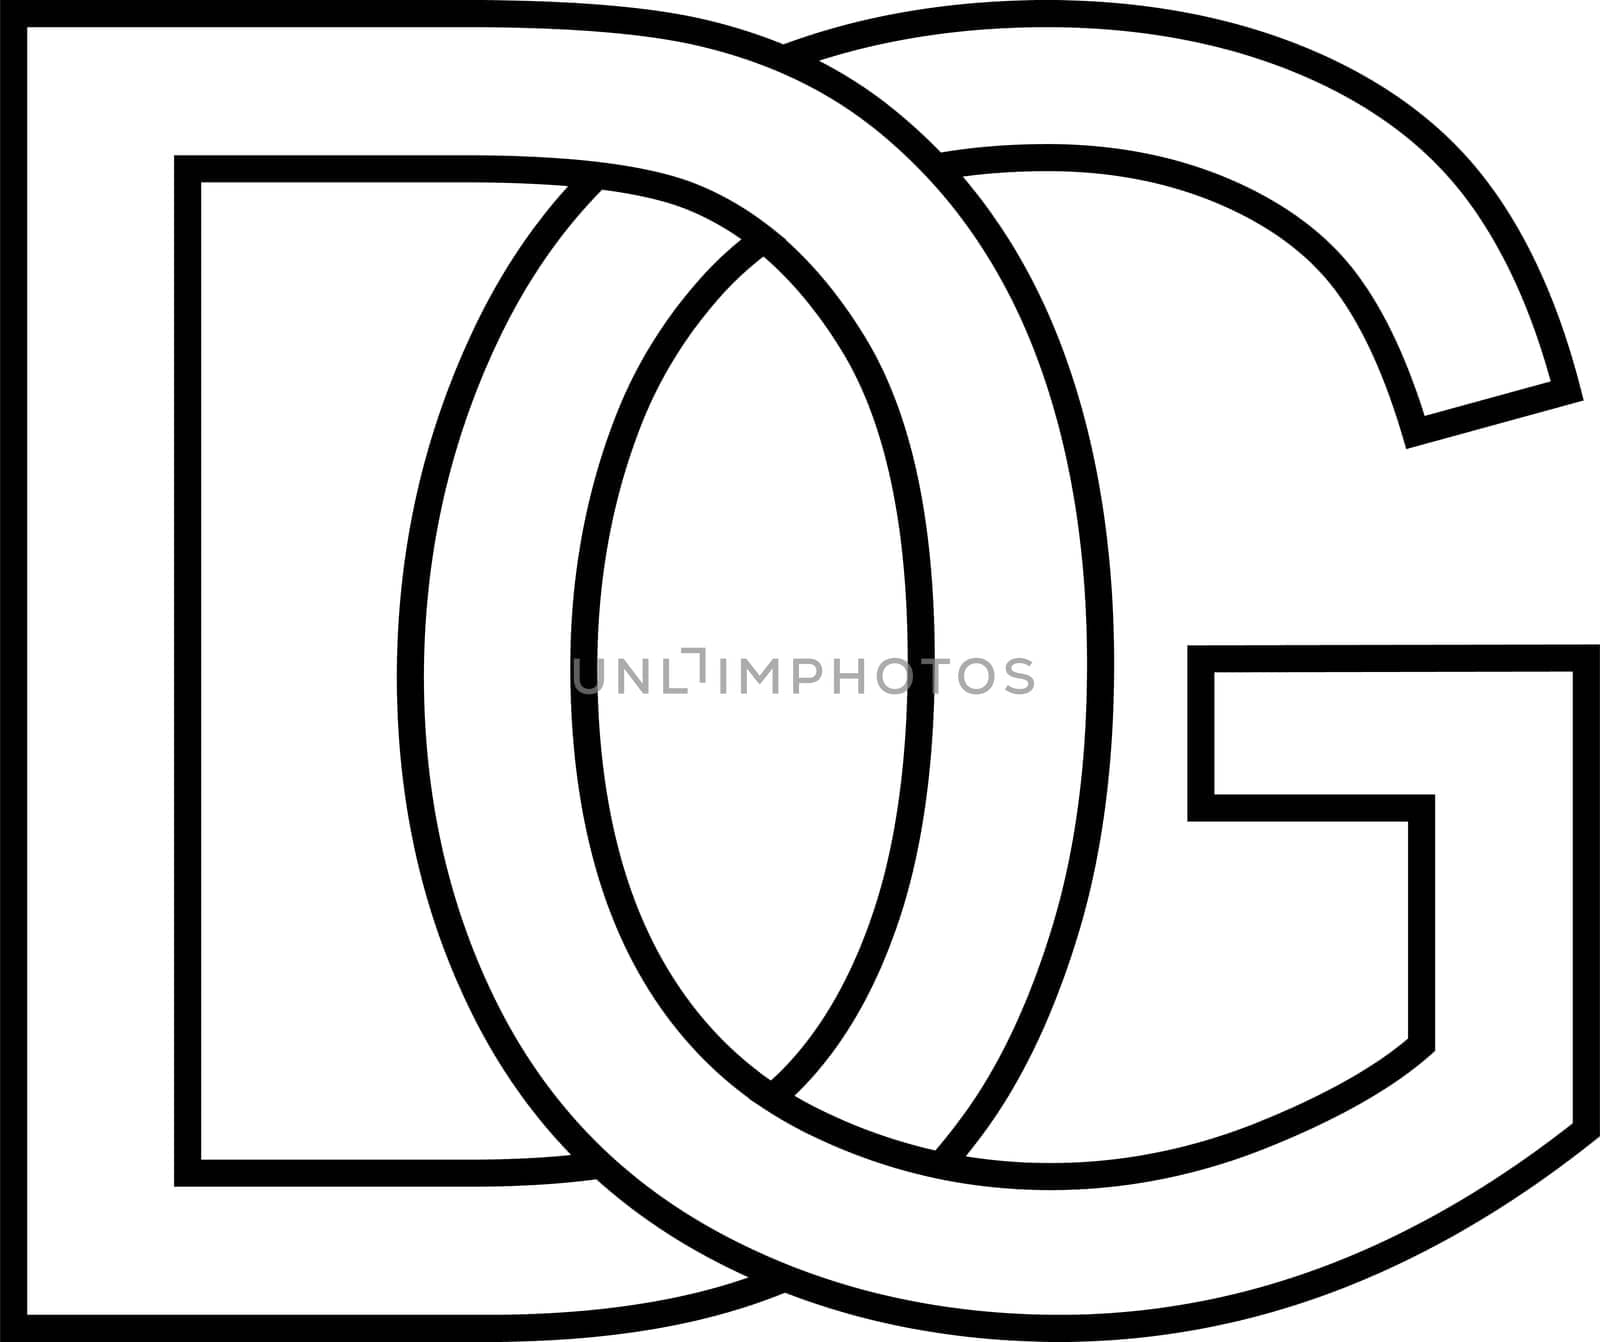 Logo sign dg gd icon sign, interlaced letters d g